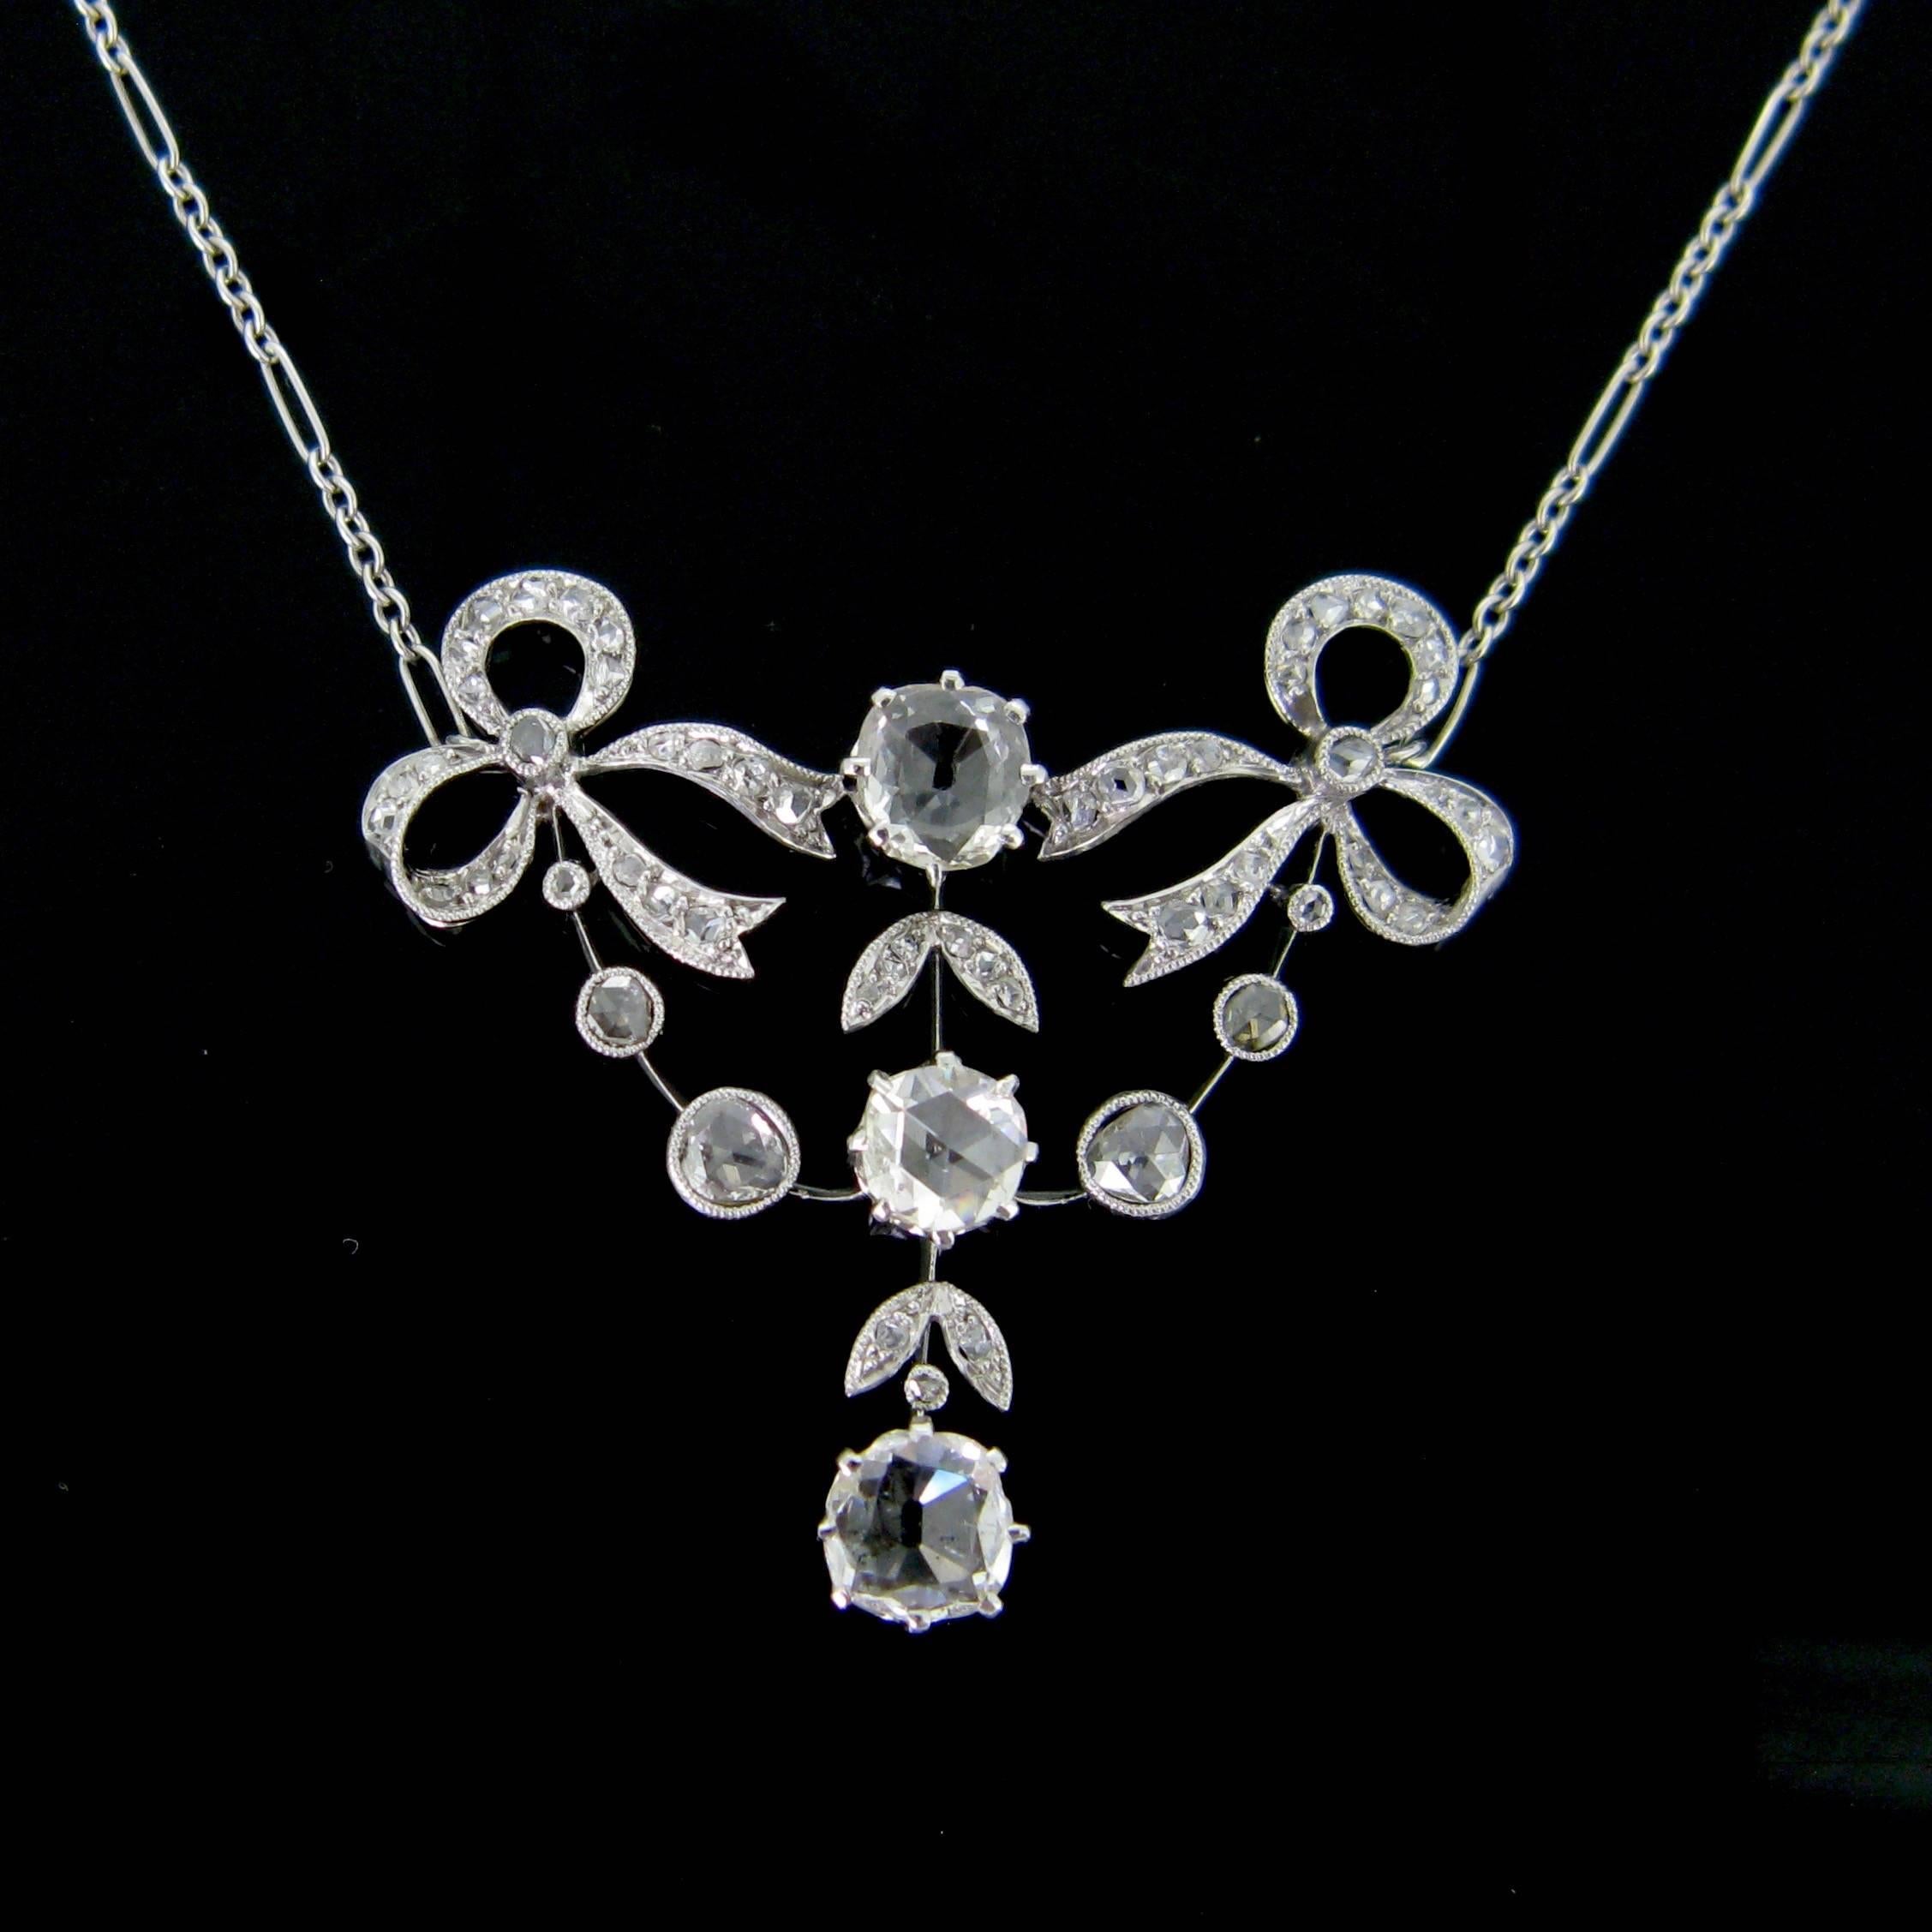 This ravishing necklace is a real testimony of the Edwardian period. It features a platinum pendant adorned with 2 ribbons and garland. It set with a rose cut diamond in its center, with 2 table cut diamonds and rose cut diamonds. The dangling